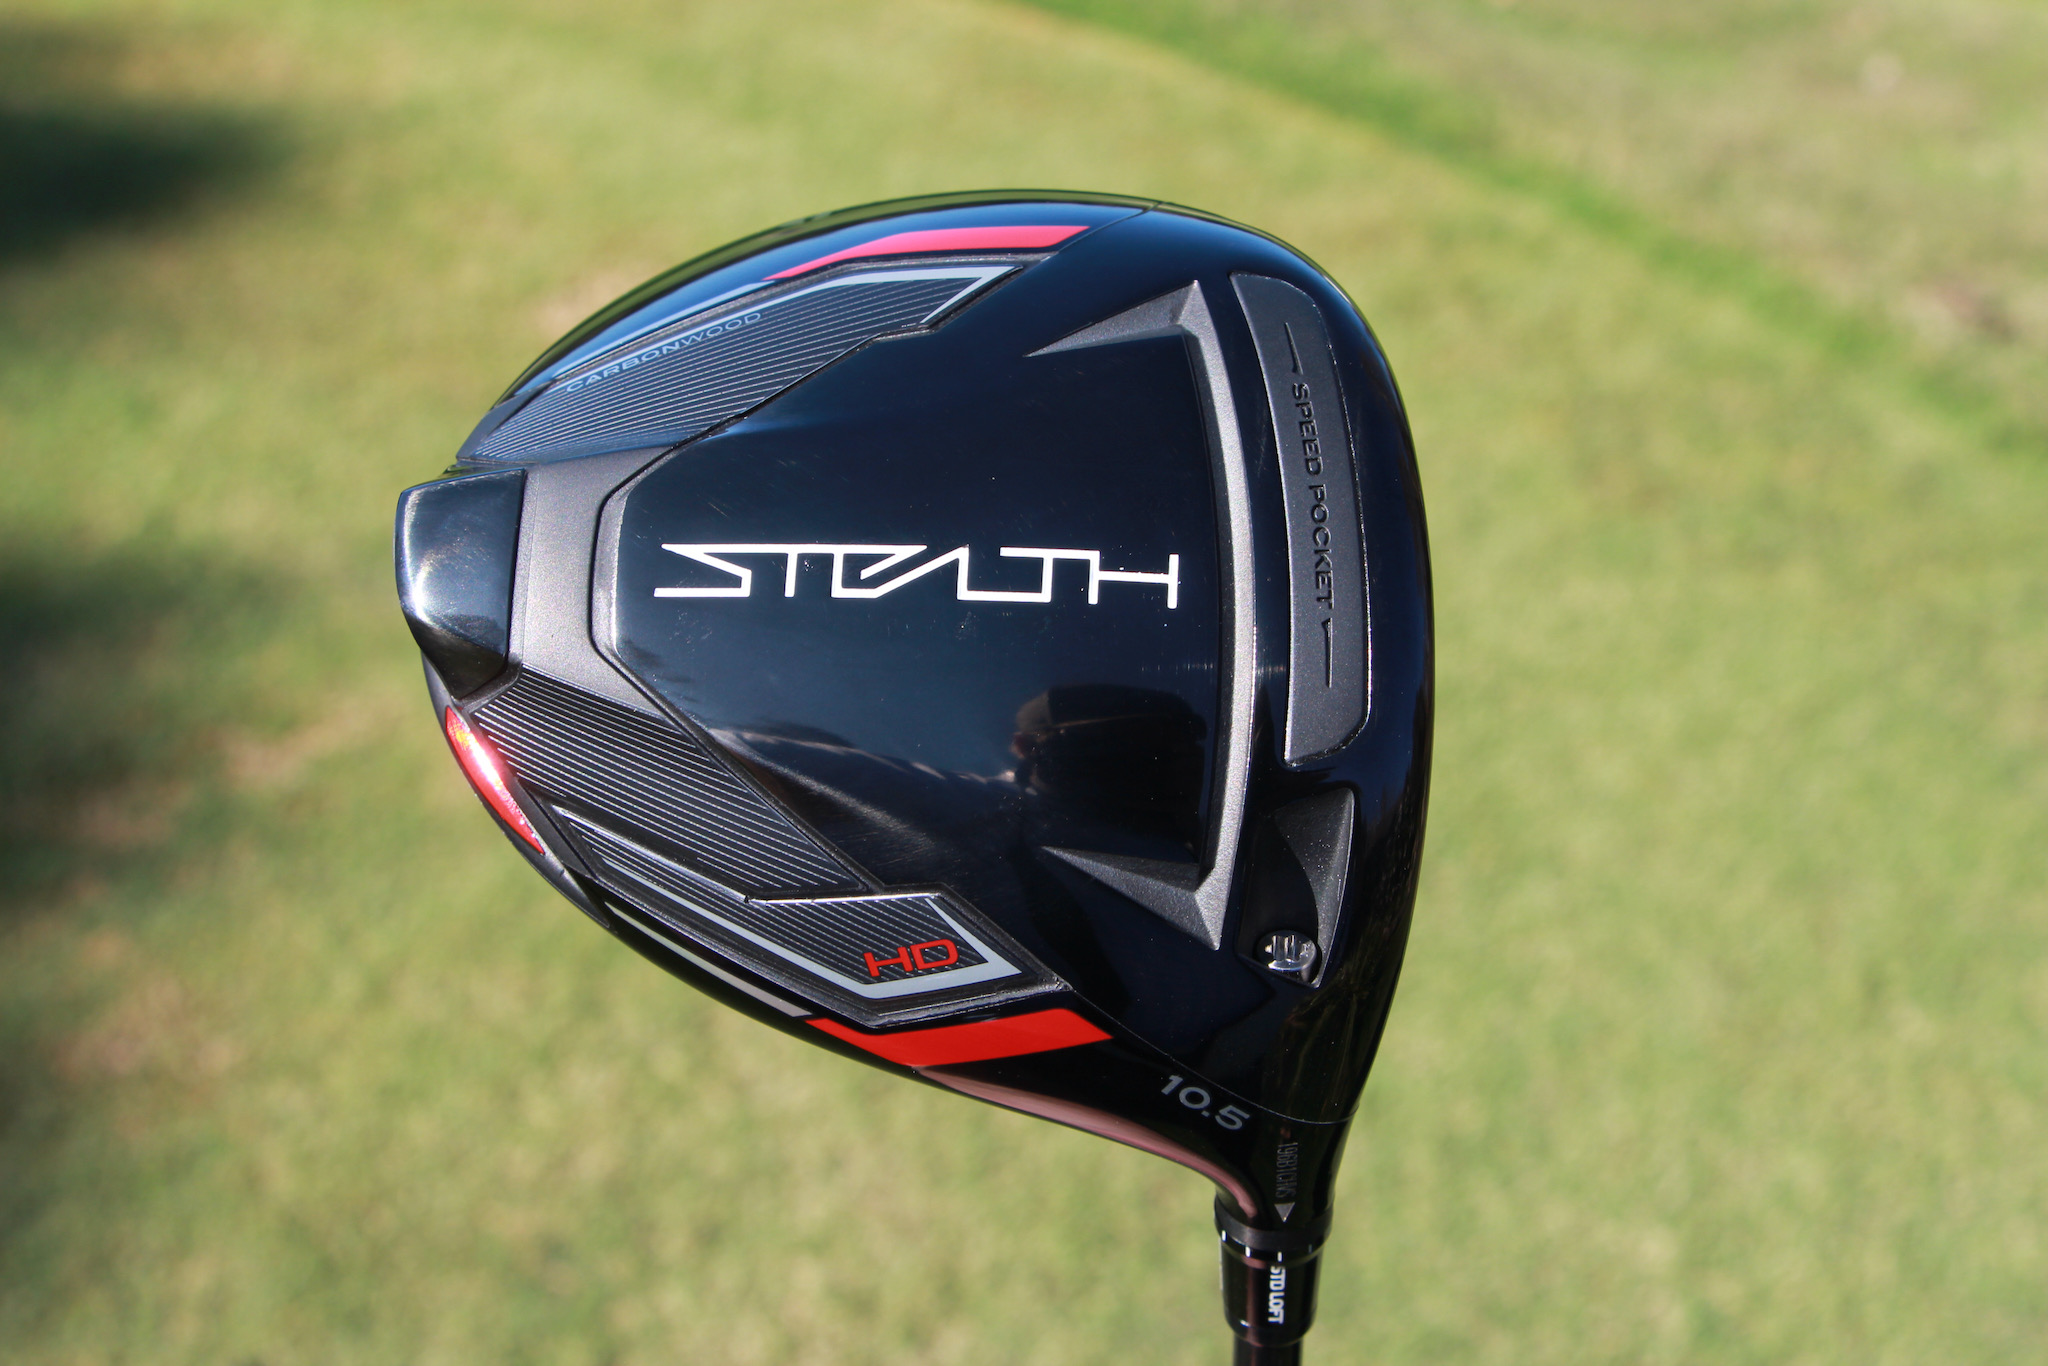 TaylorMade Stealth HD driver: Sole